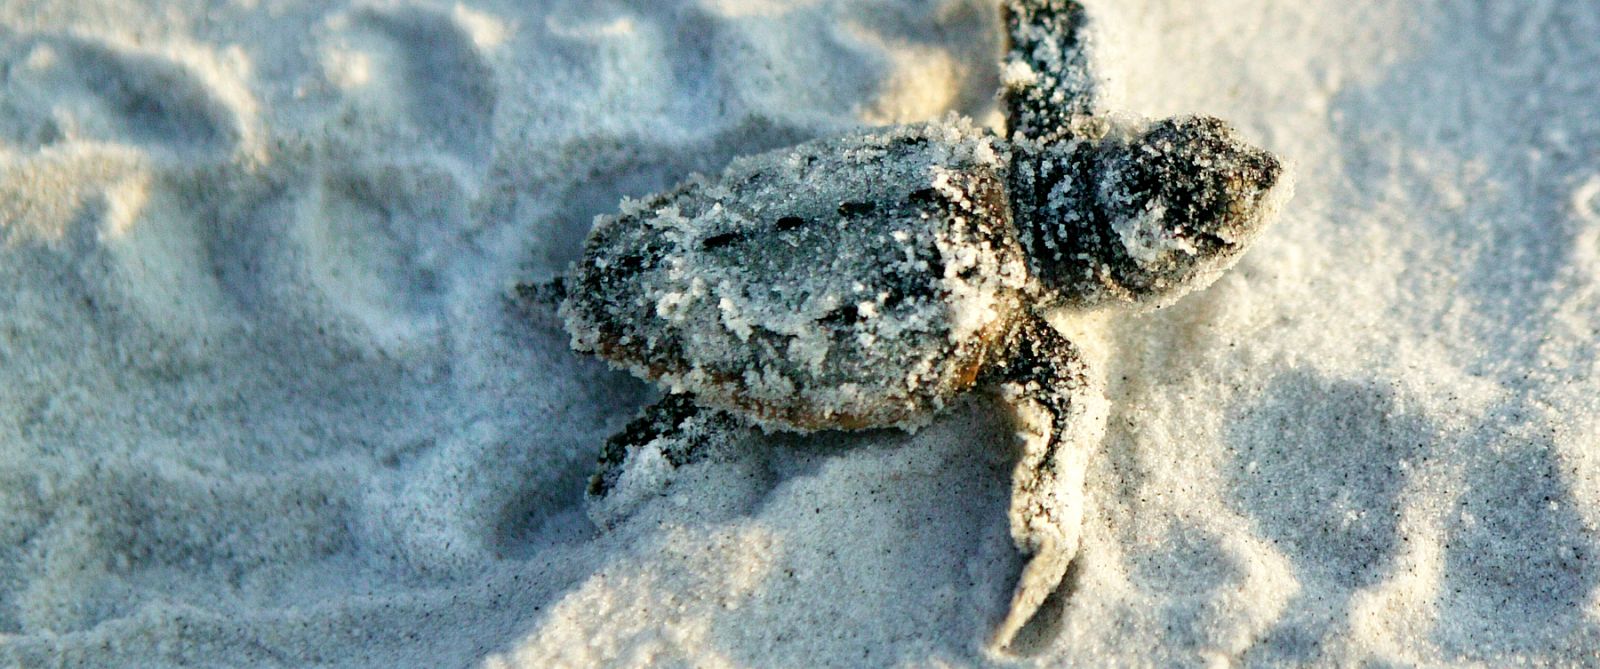 Turtle hatchling on the beach